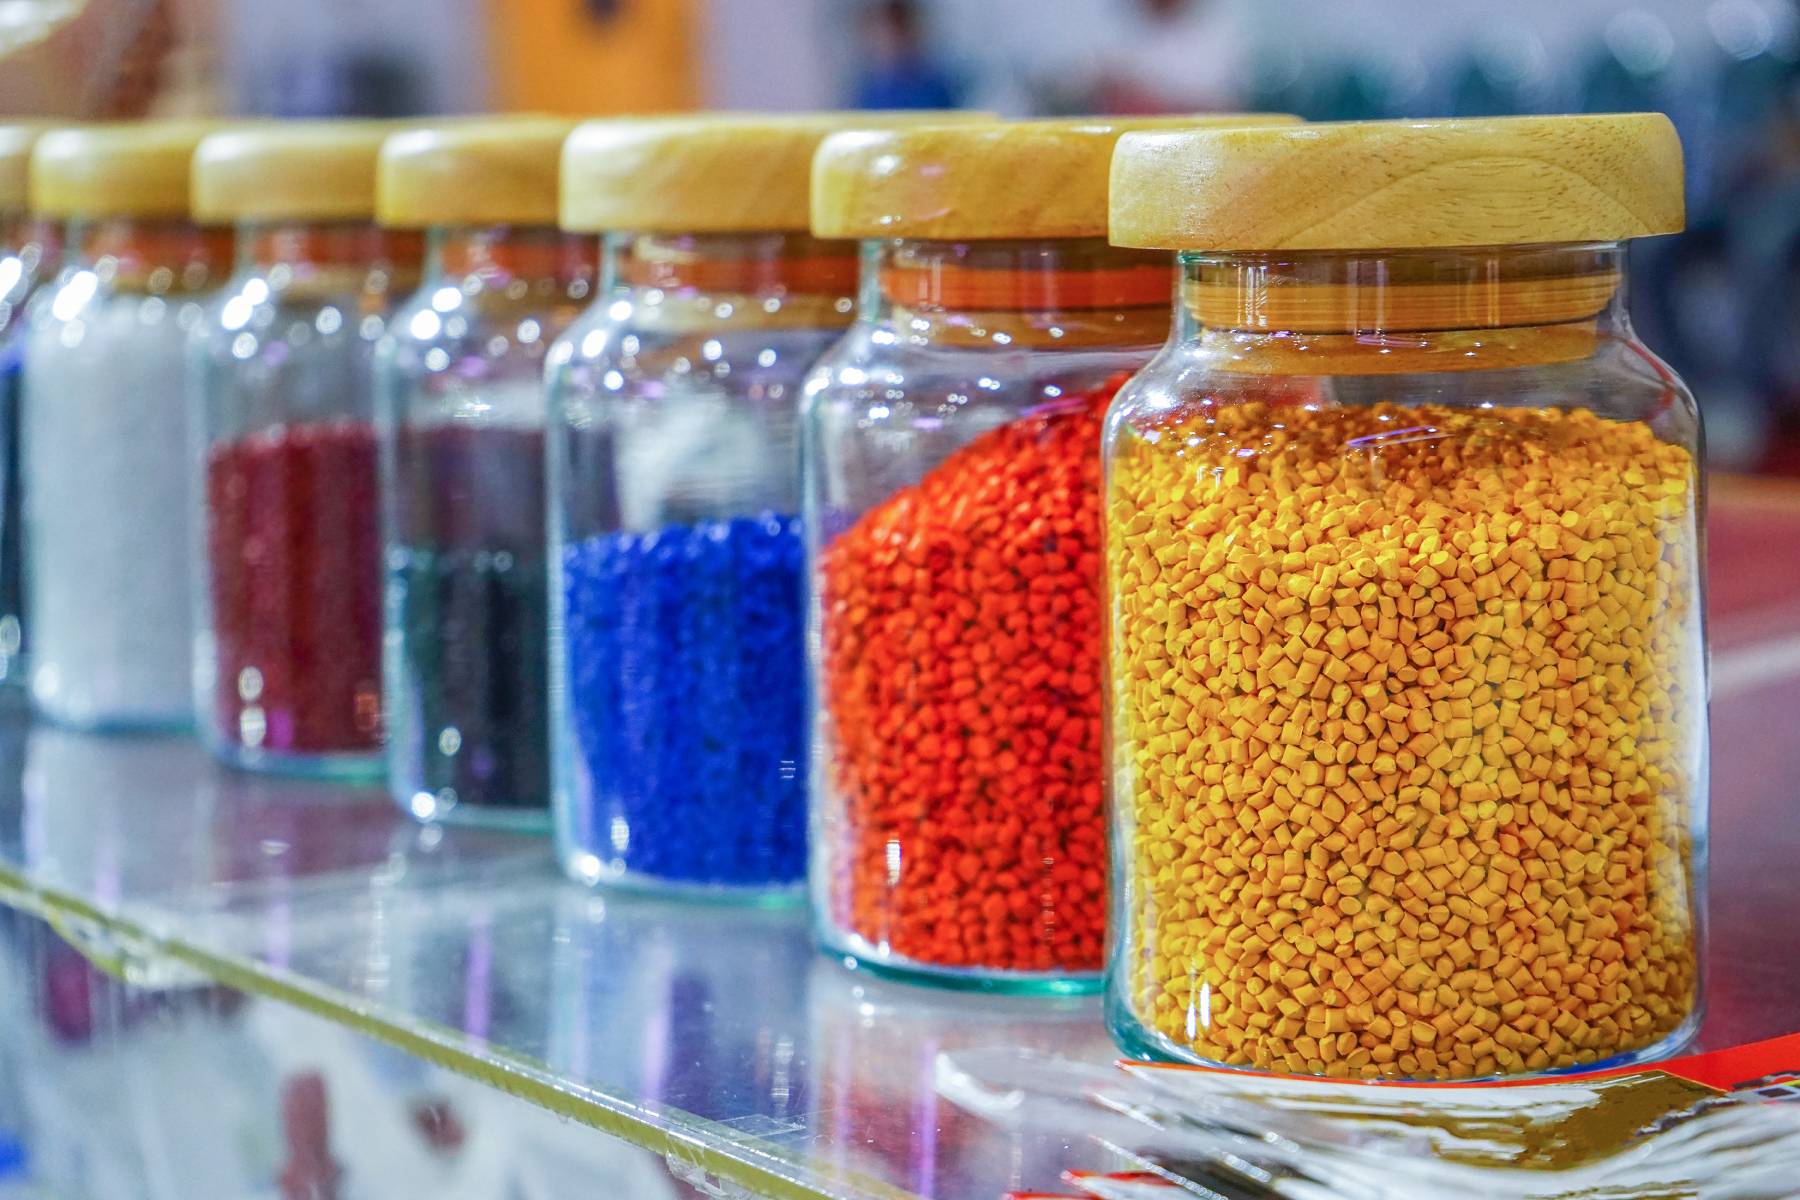 What are plastic granules and what are they used for?